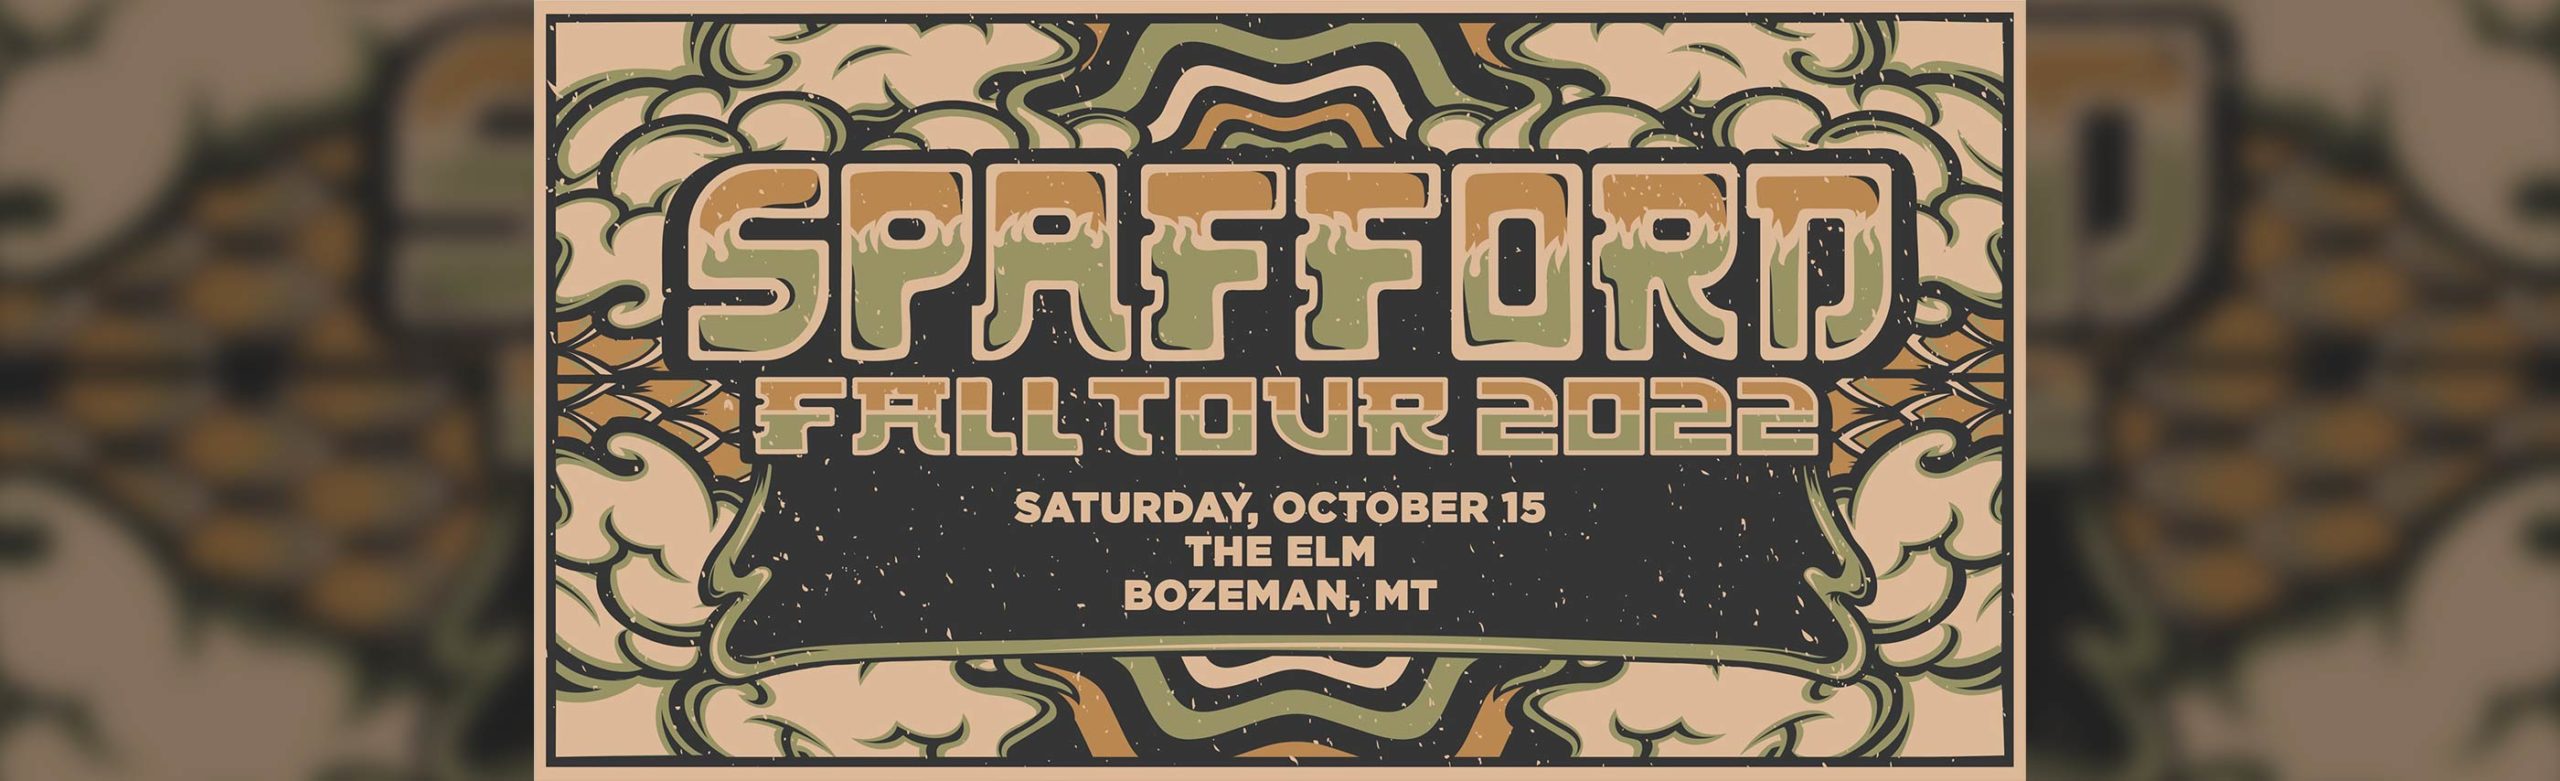 Spafford Announces Montana Concerts in Fall 2022 Image